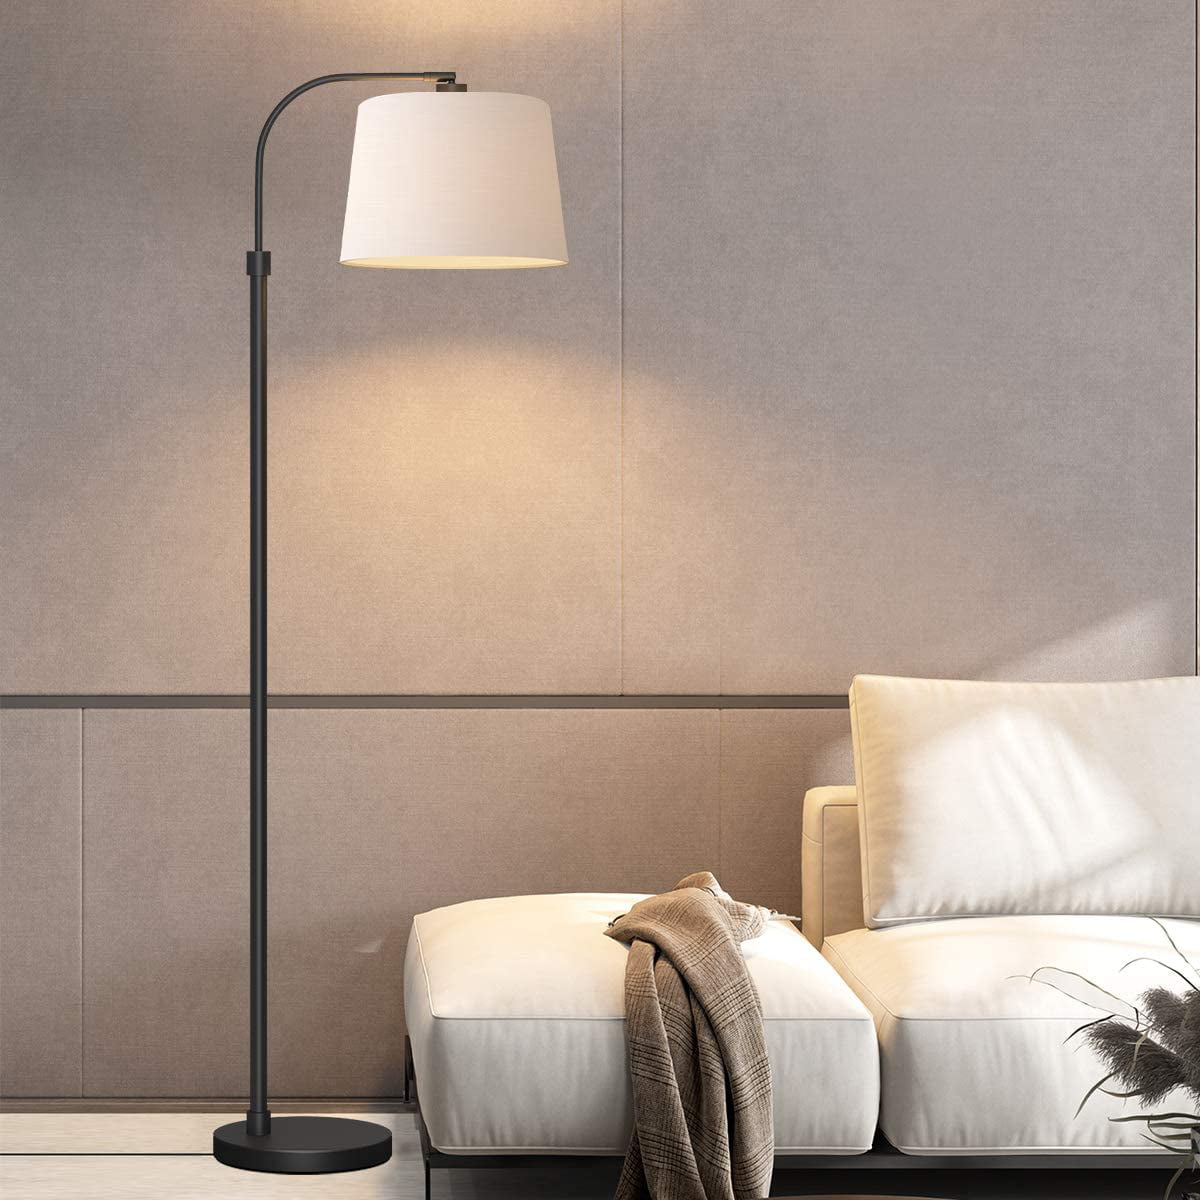 Modern Floor Lamp For Living Rooms Led, Images Of Floor Lamps In Bedrooms